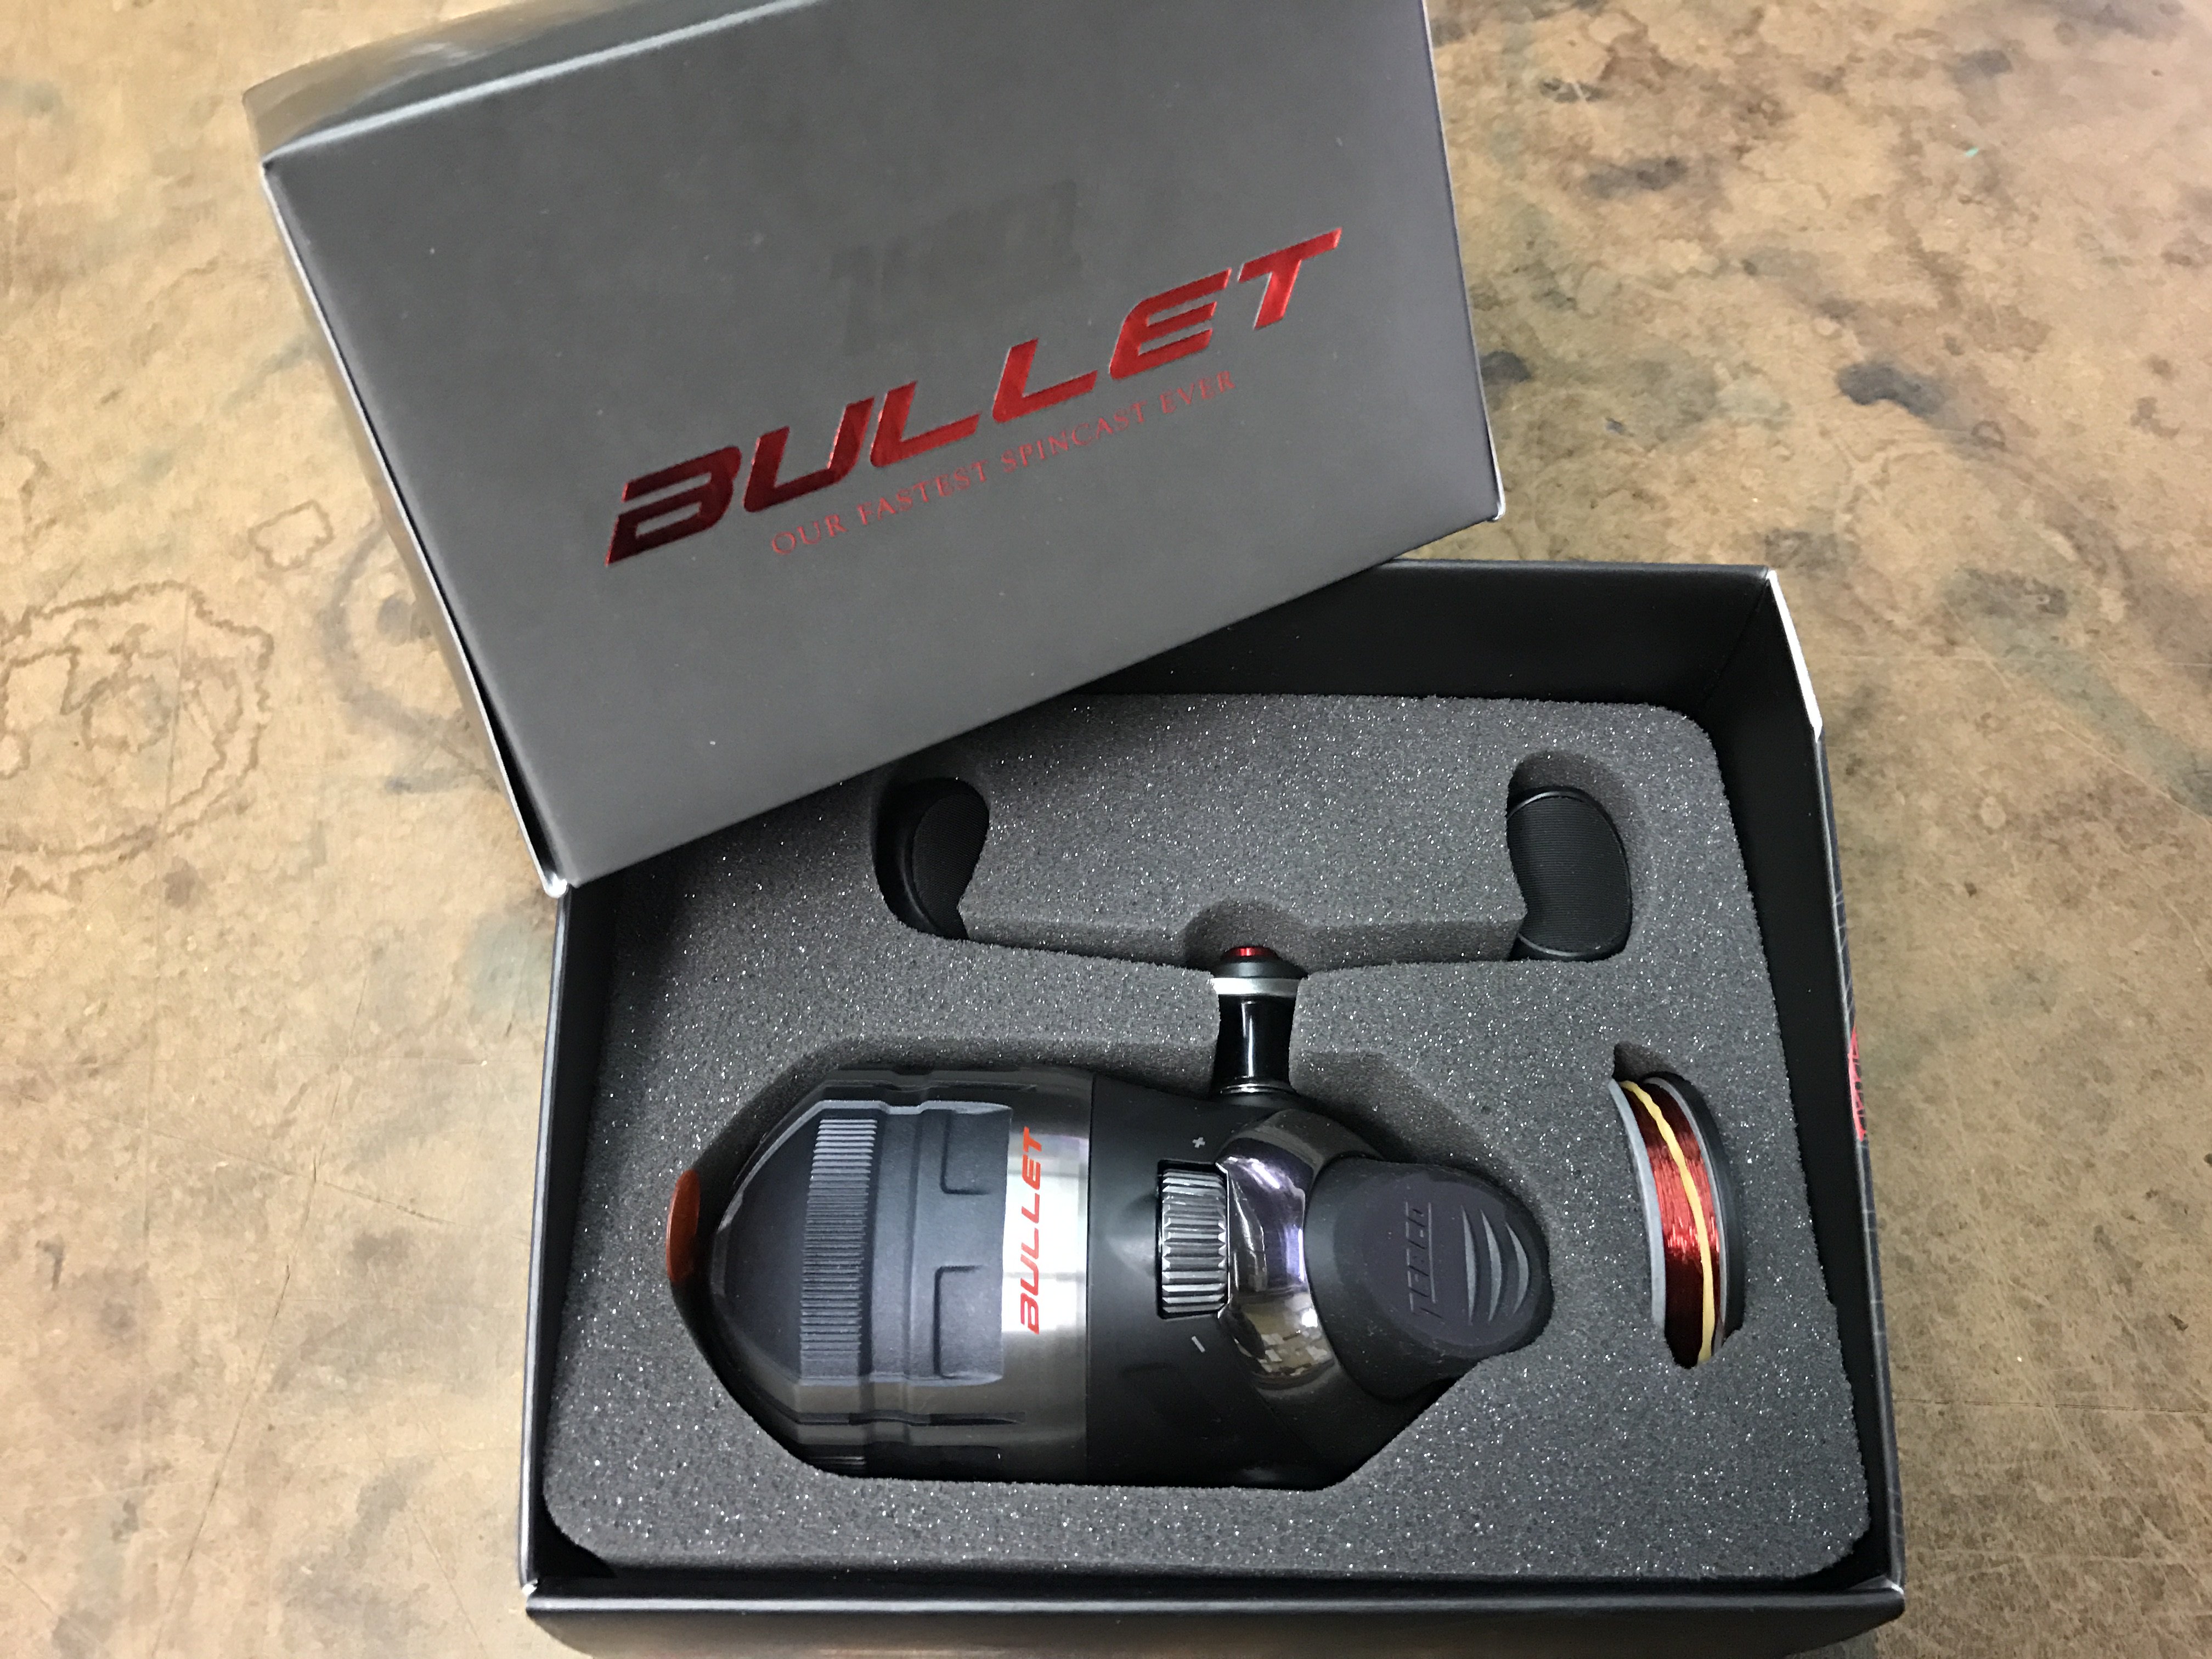 Burch Fishing Tackle on X: Zebco Bullet reels have arrived